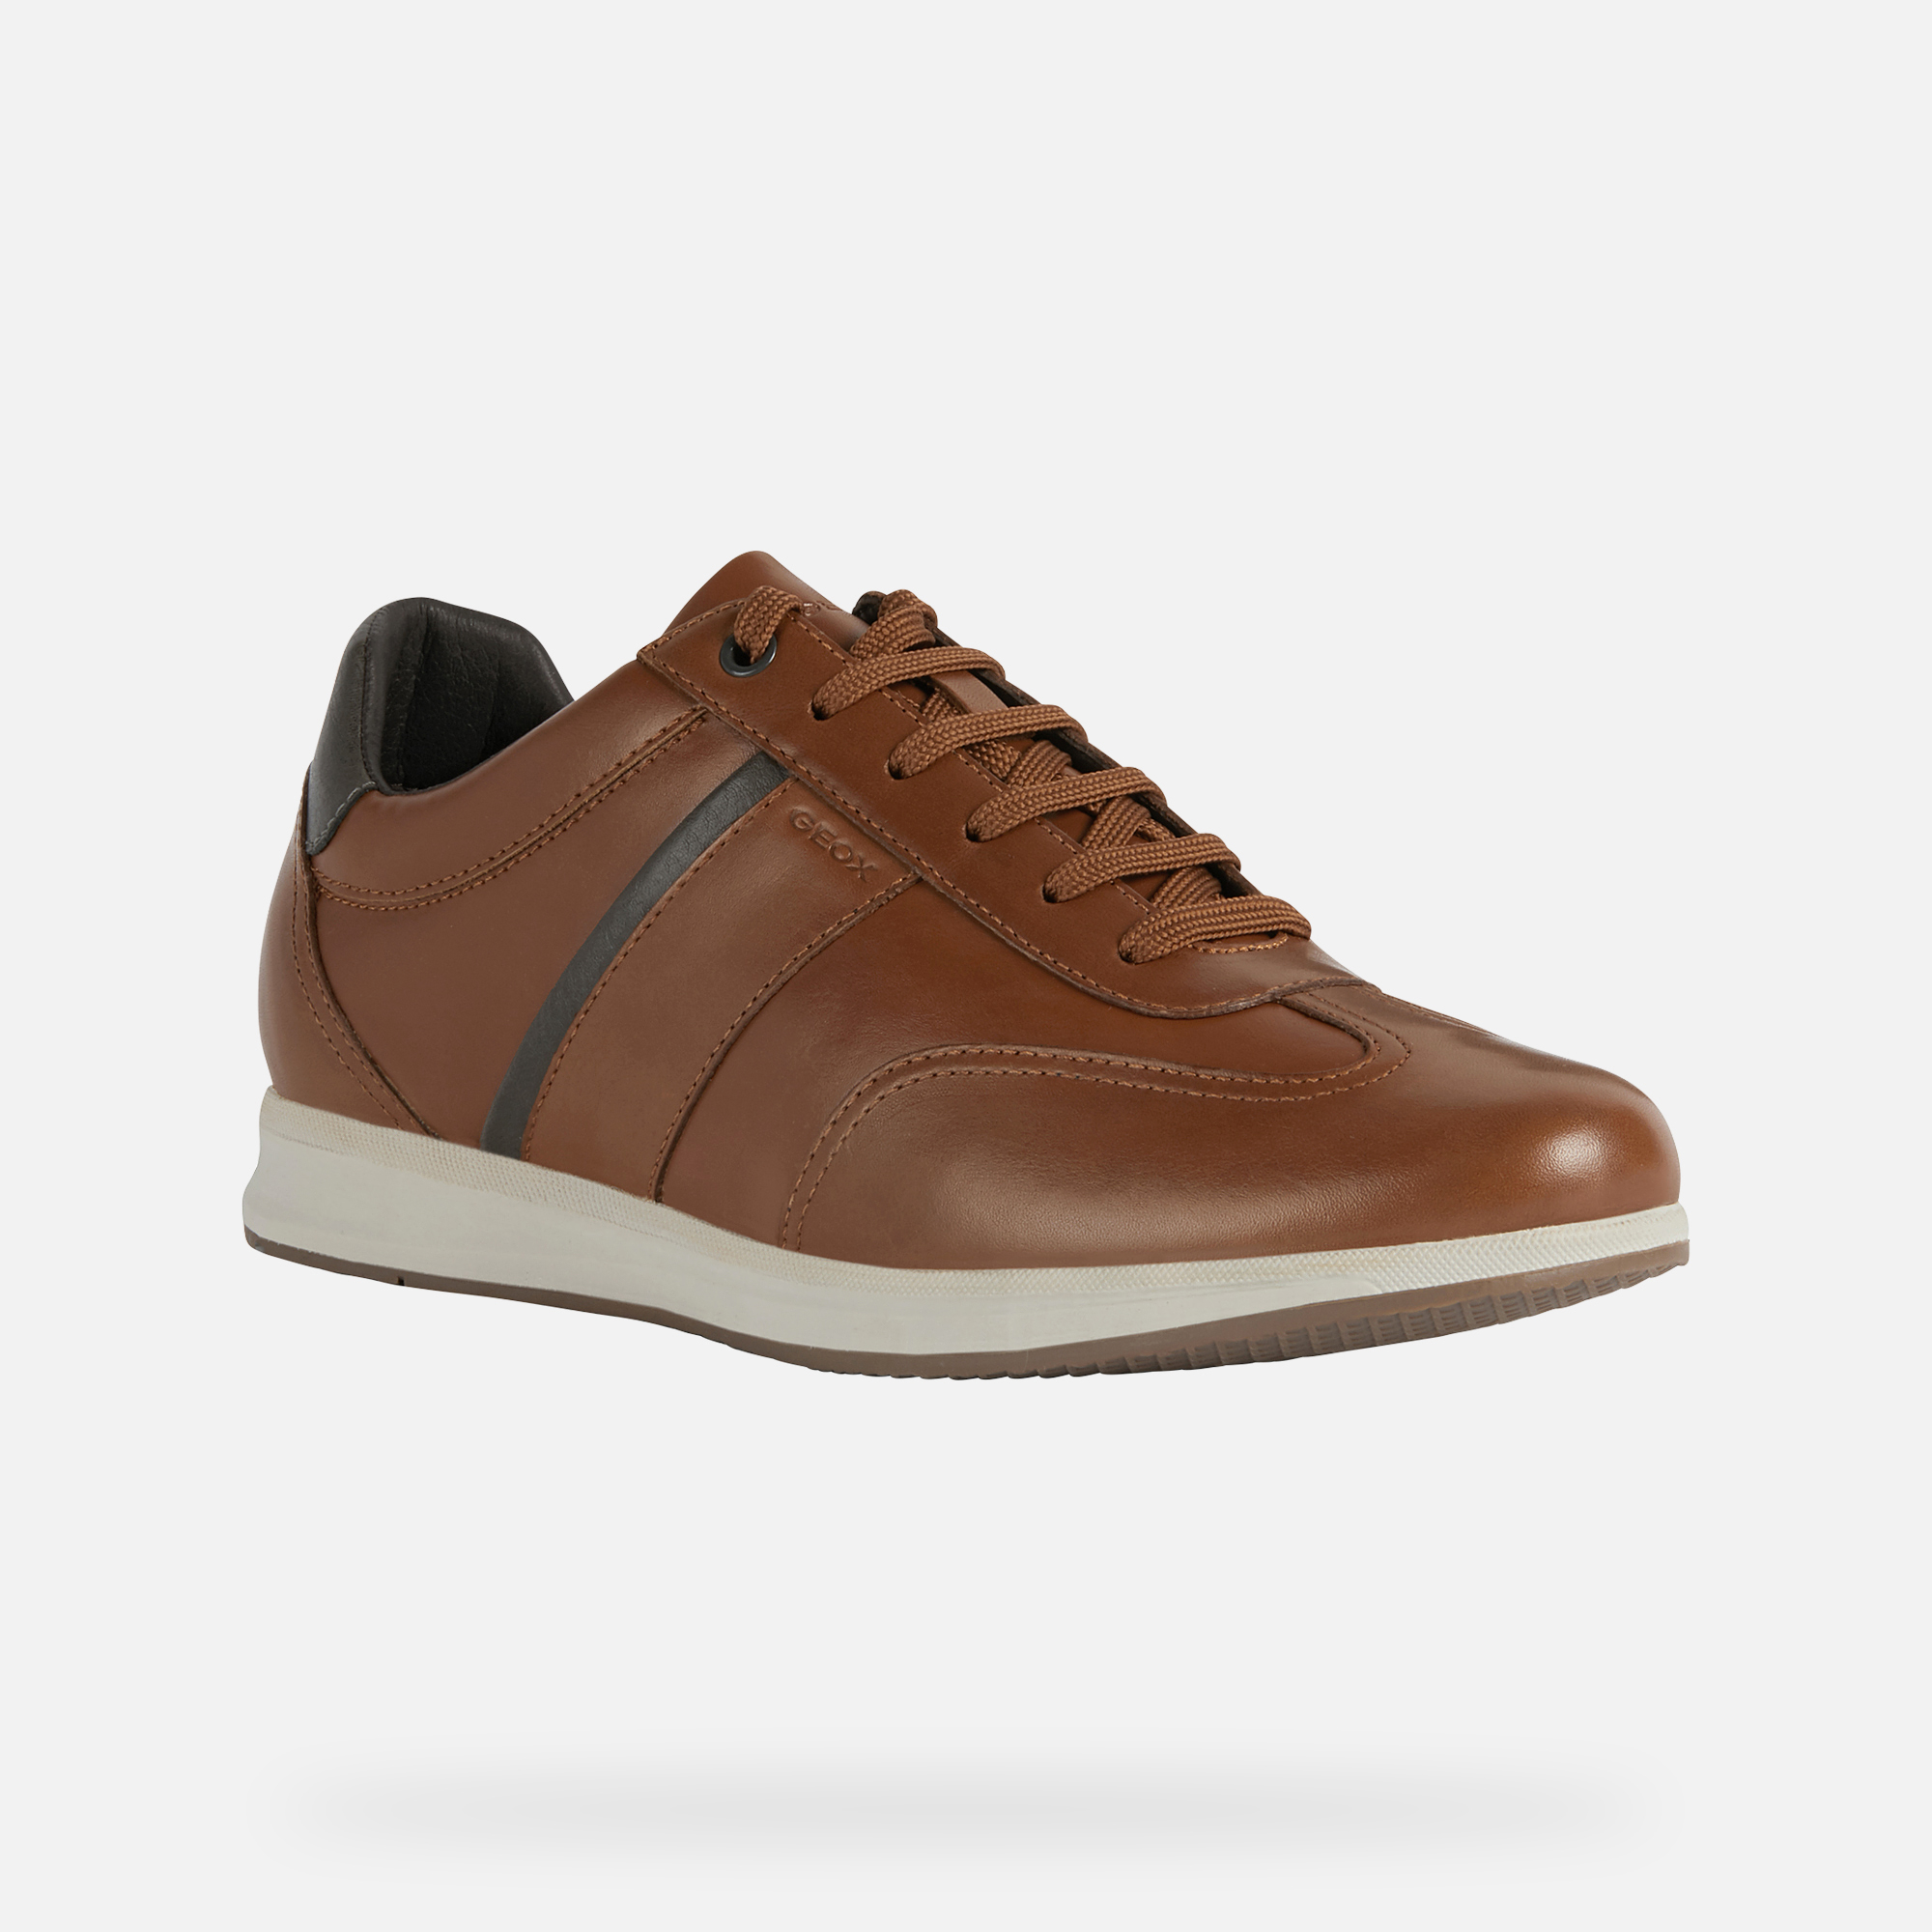 Geox® AVERY Man: Chestnut and Cognac Sneakers | FW21 Geox®